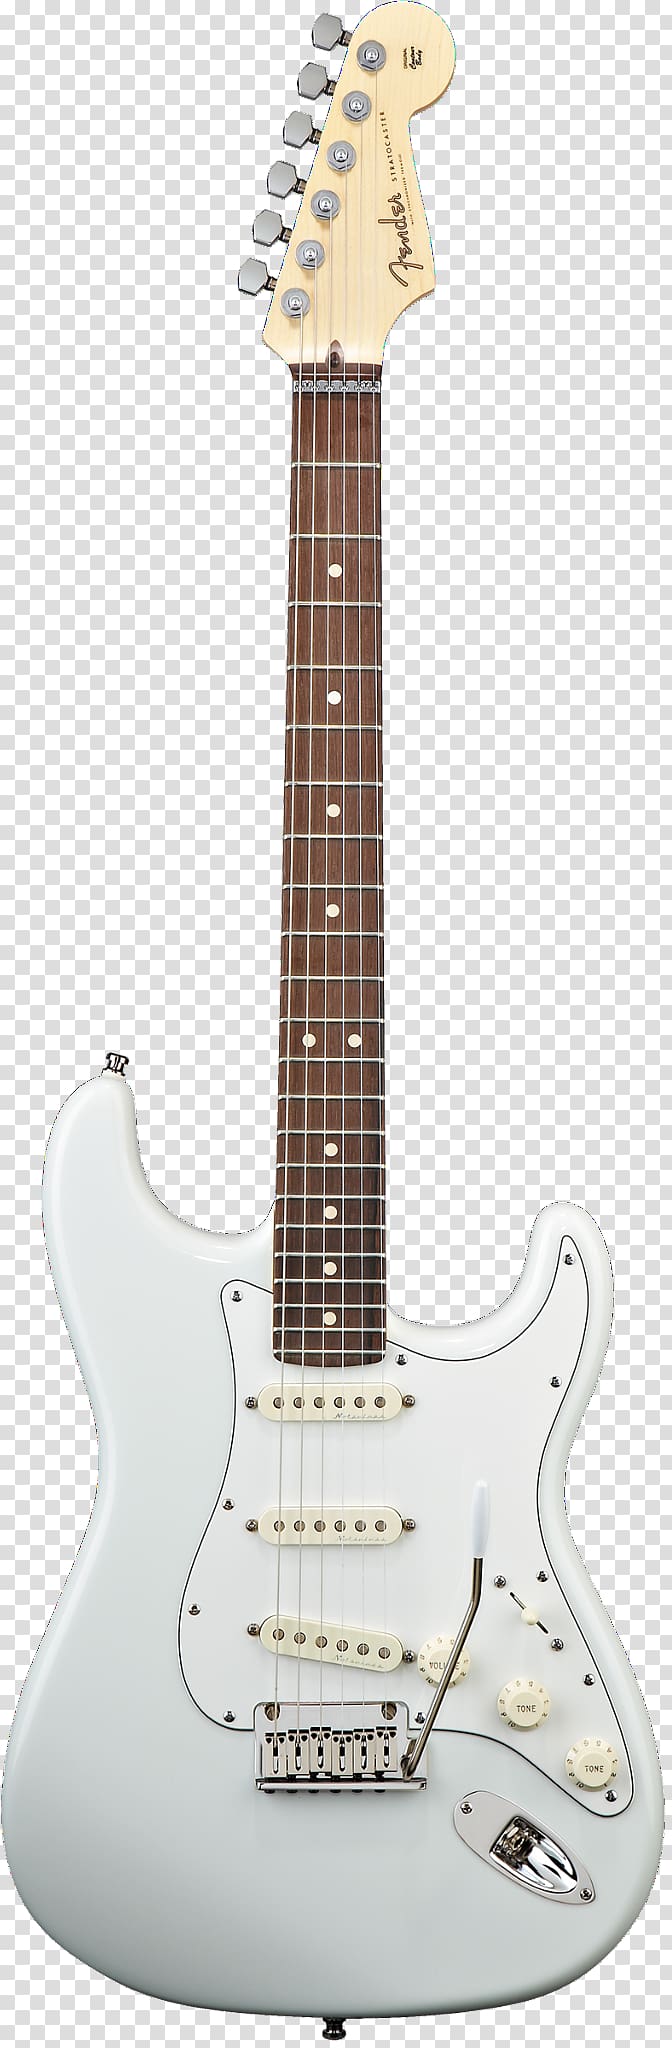 Acoustic-electric guitar Bass guitar Fender Stratocaster Fender Custom Shop, electric guitar transparent background PNG clipart